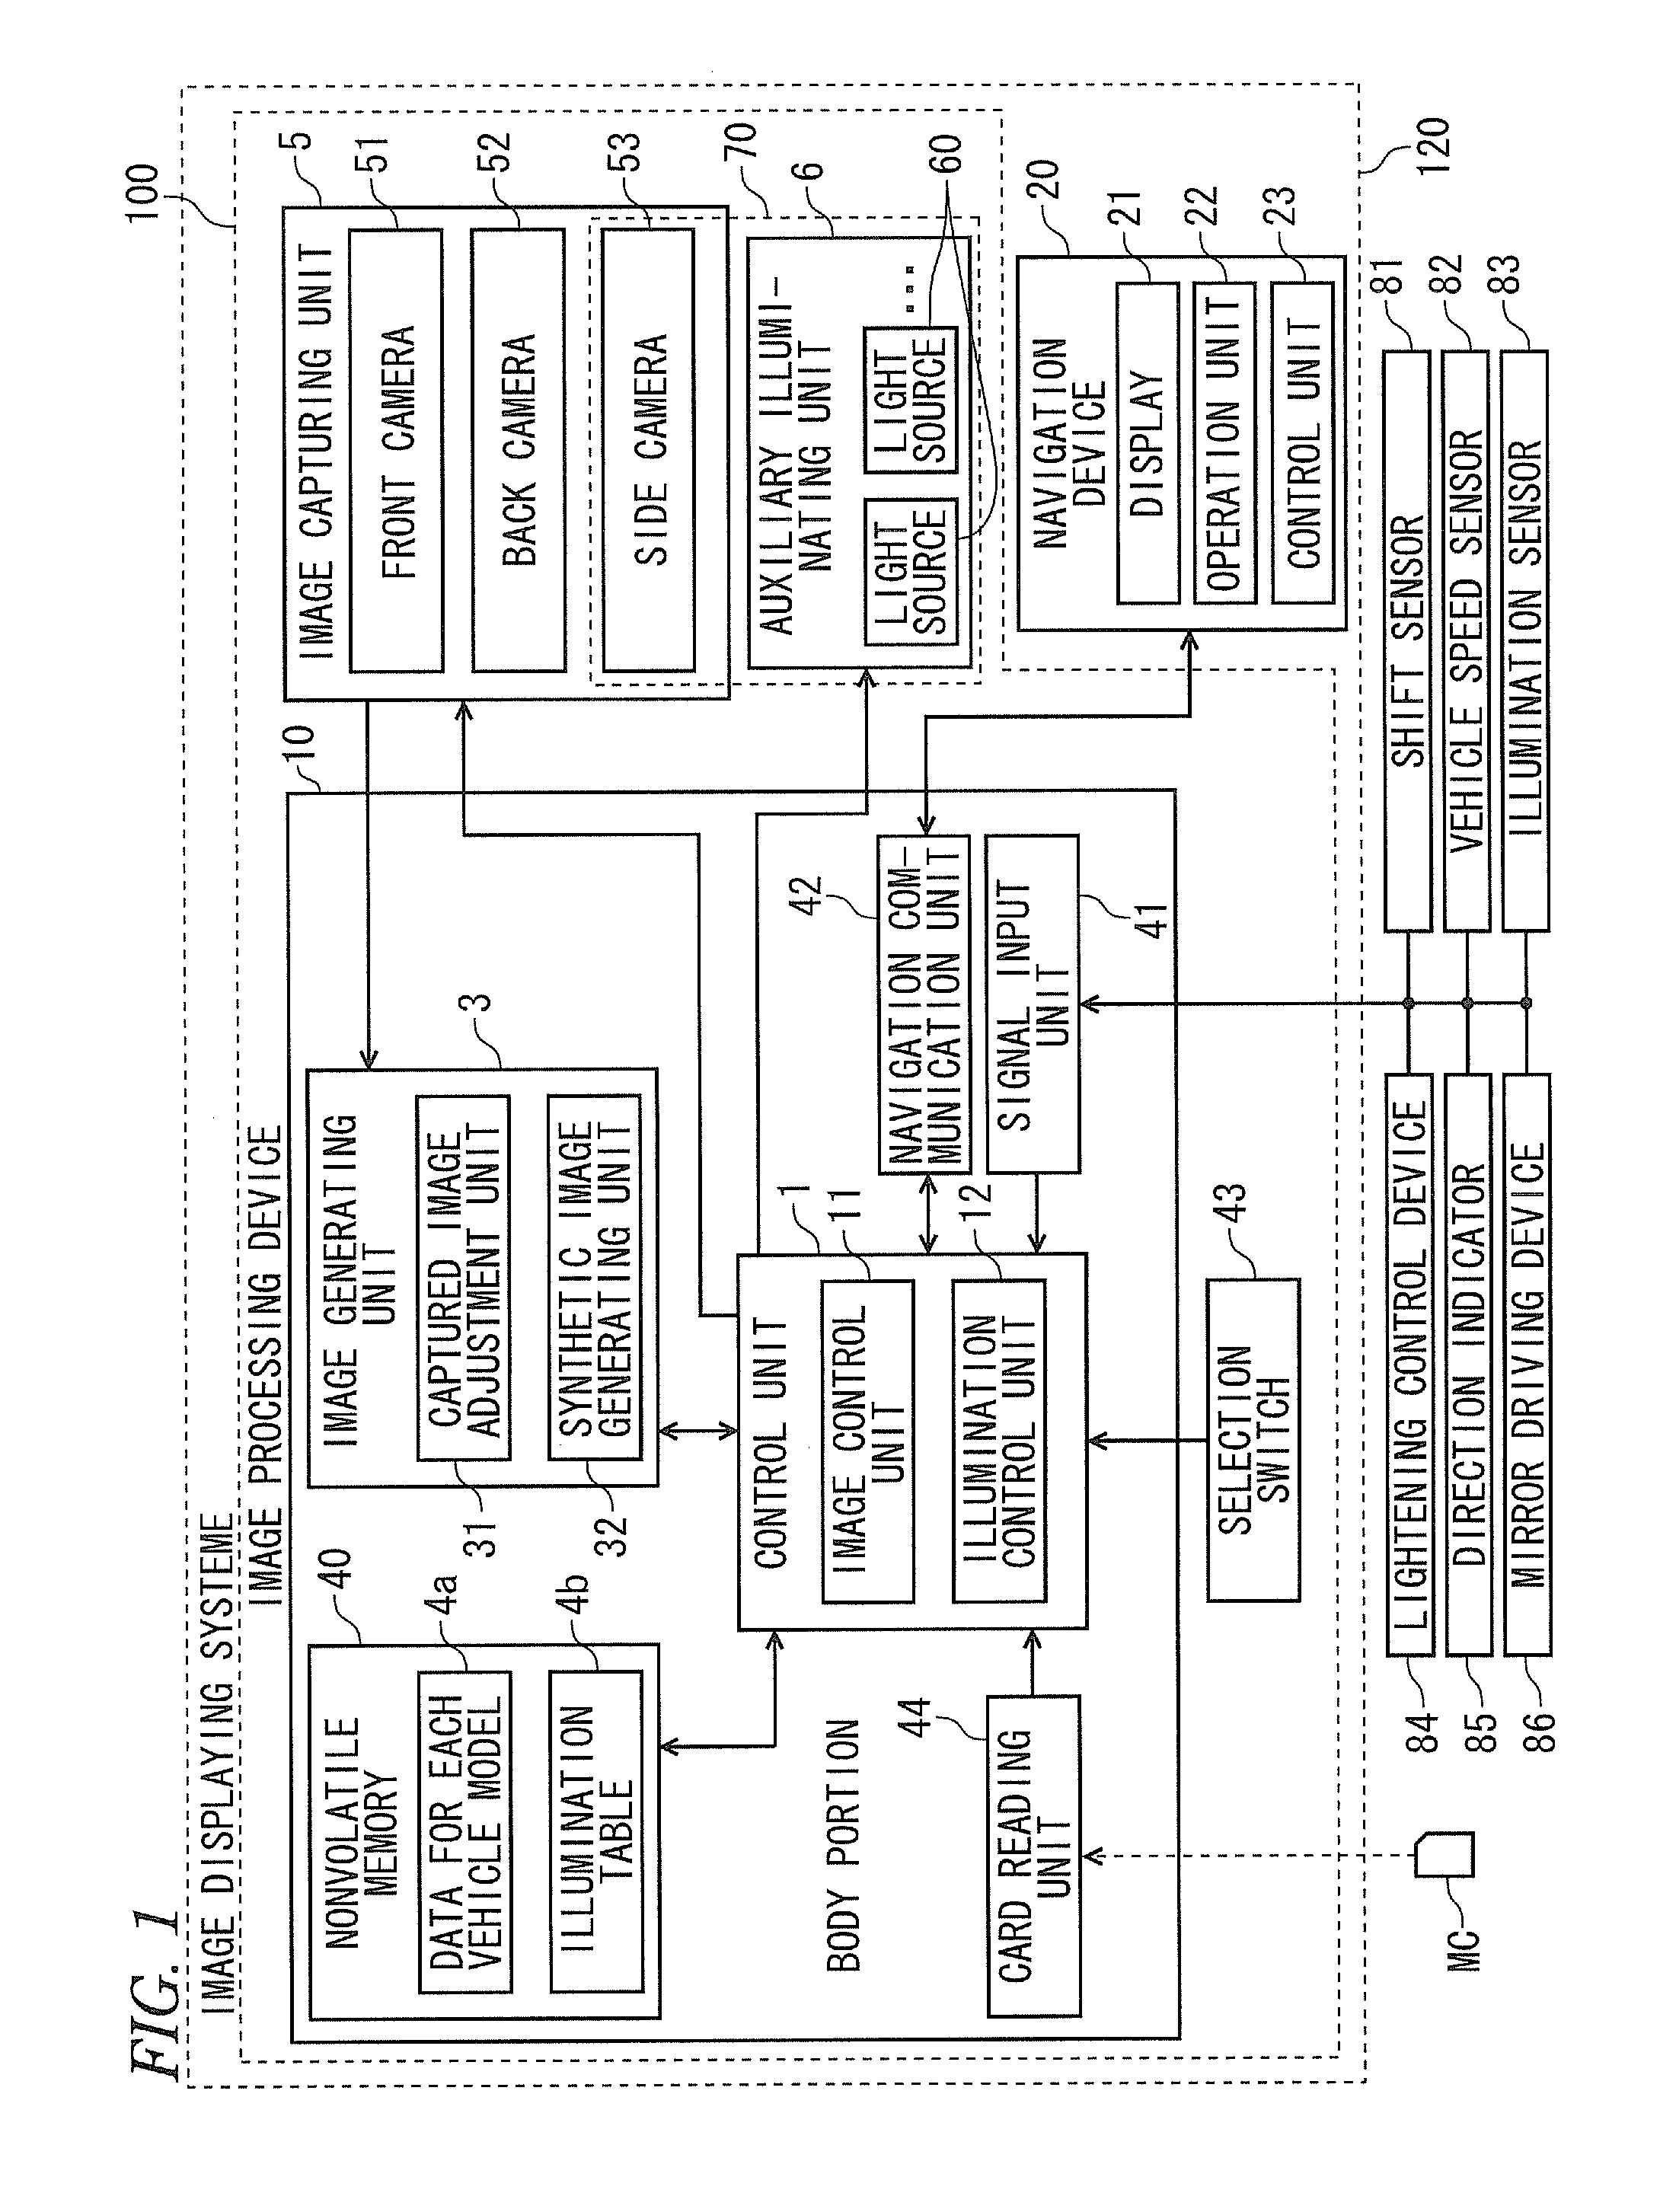 In-vehicle illuminating apparatus, image processing apparatus, and image displaying system